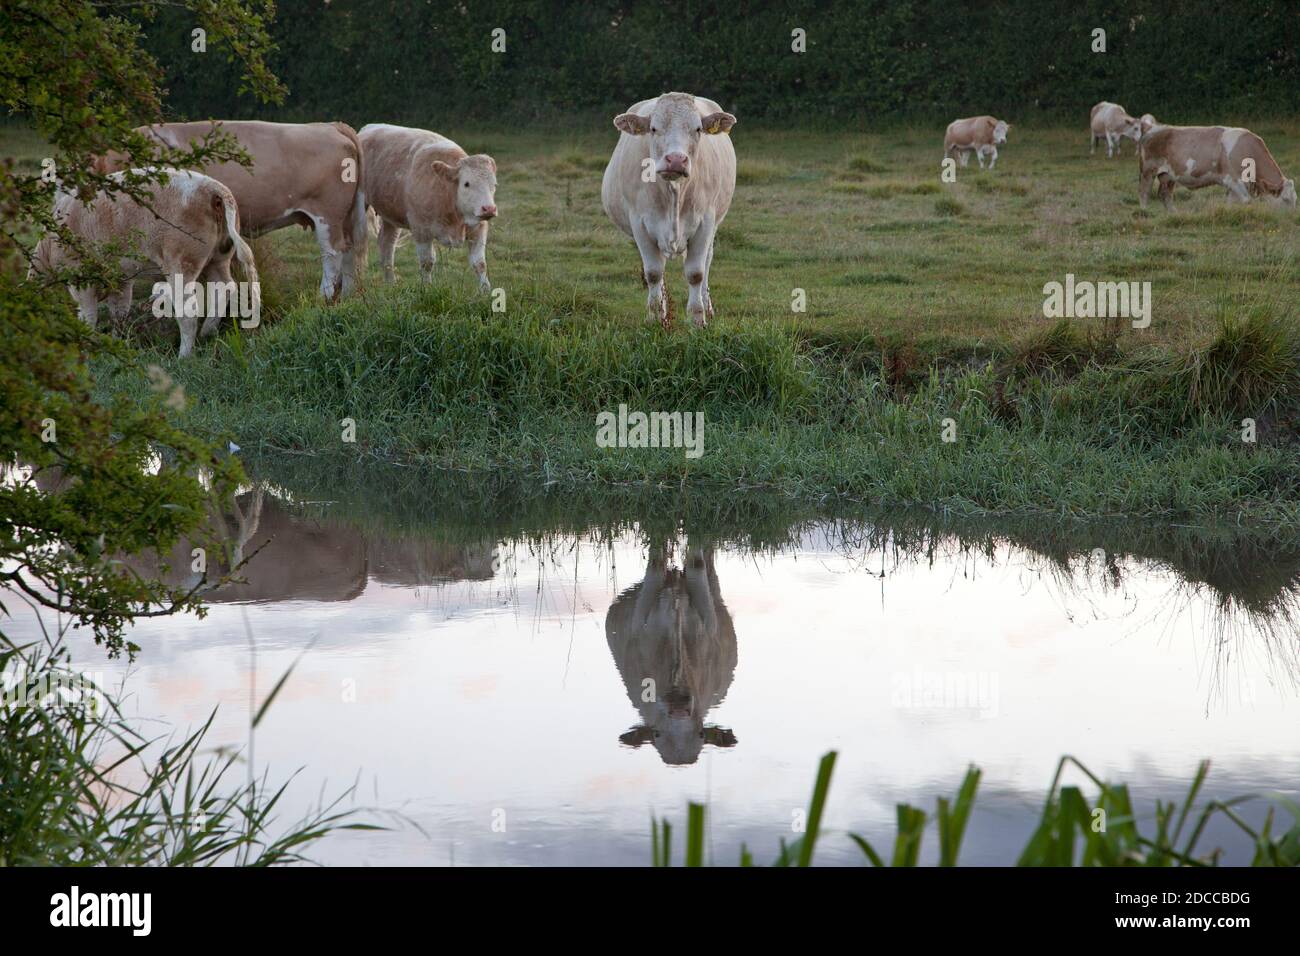 Cattle beside the River Ebble near Odstock in Wiltshire. Stock Photo